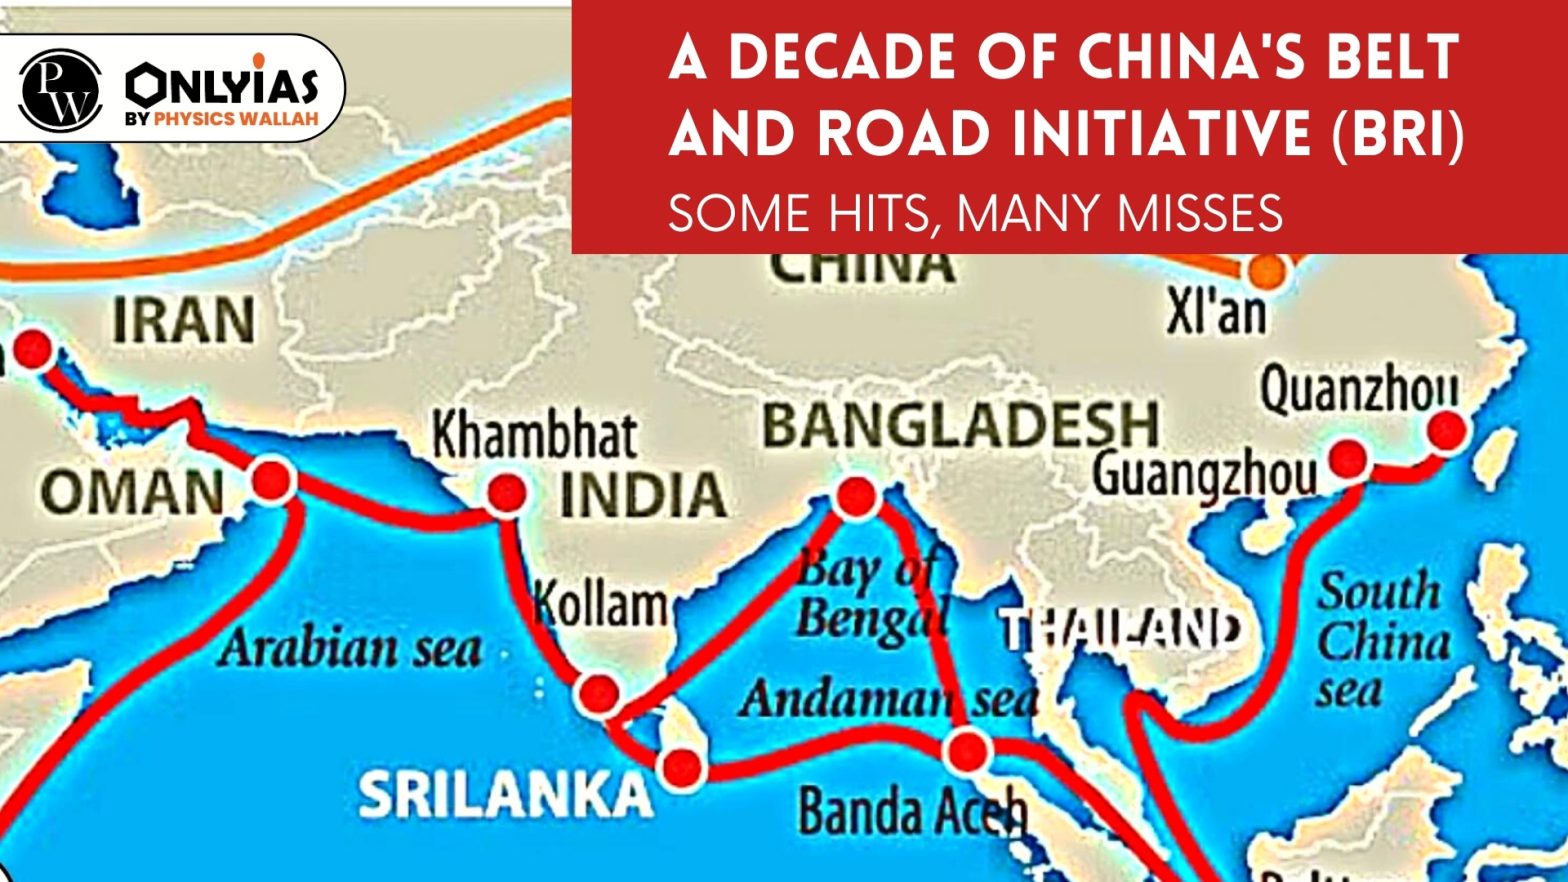 A Decade of China’s Belt and Road Initiative (BRI): Some Hits, Many Misses